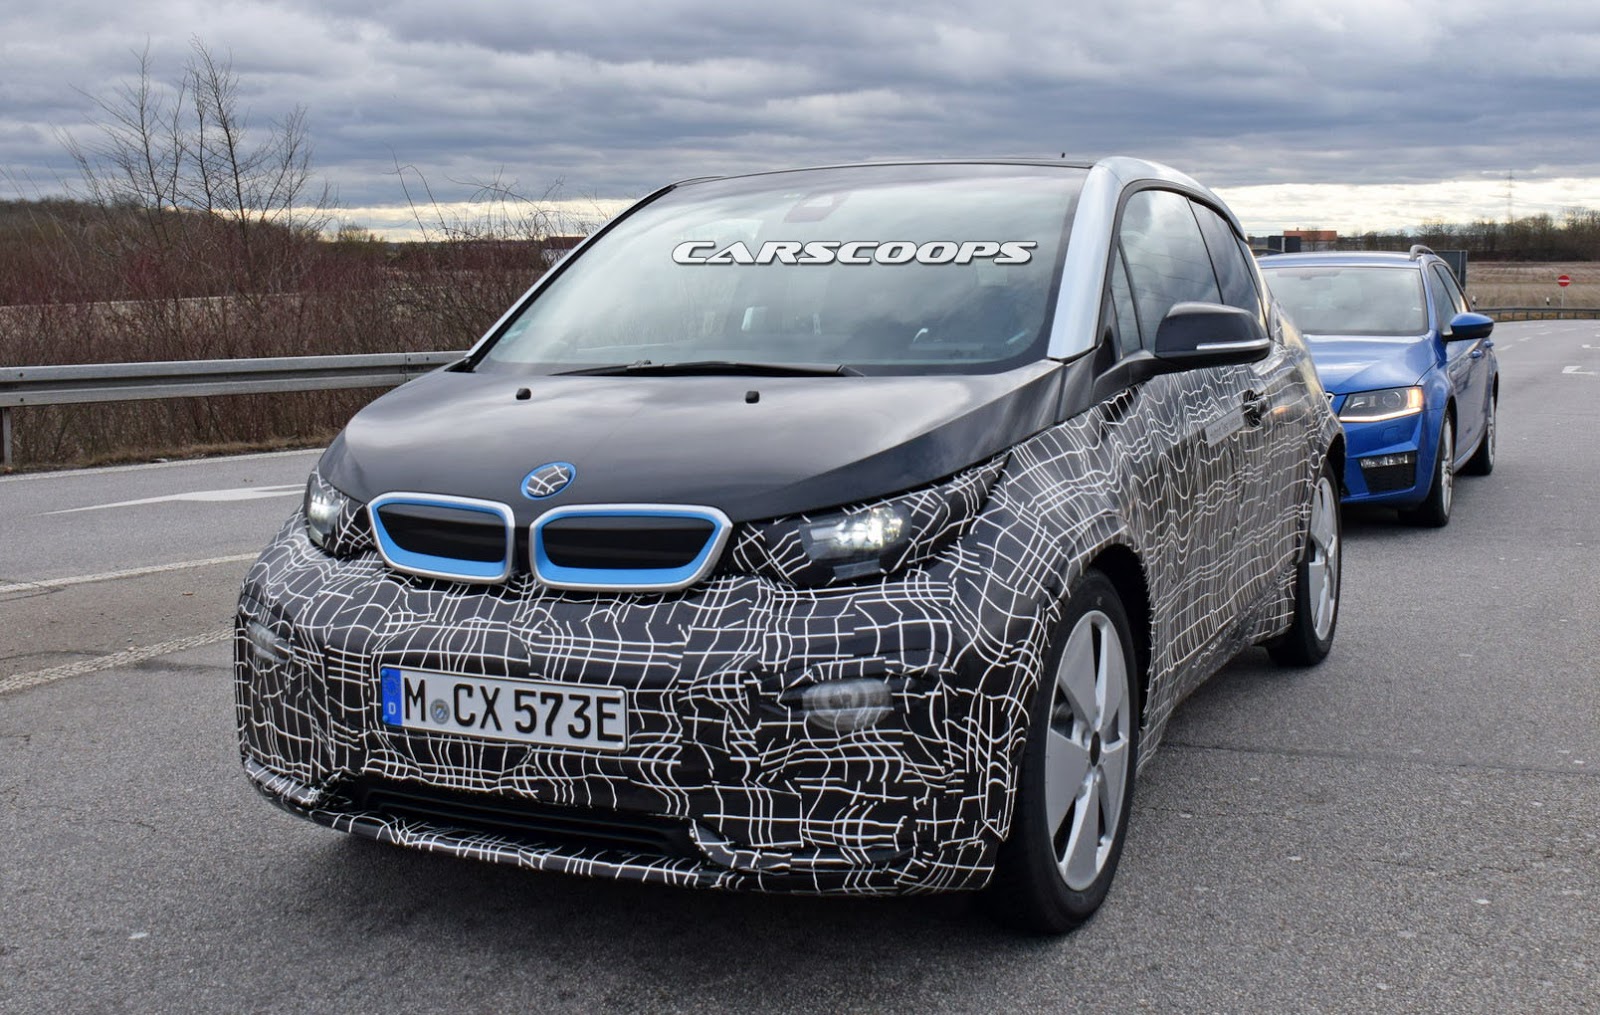 Slightly Updated 2018 BMW i3 Pops-Up in New Testing